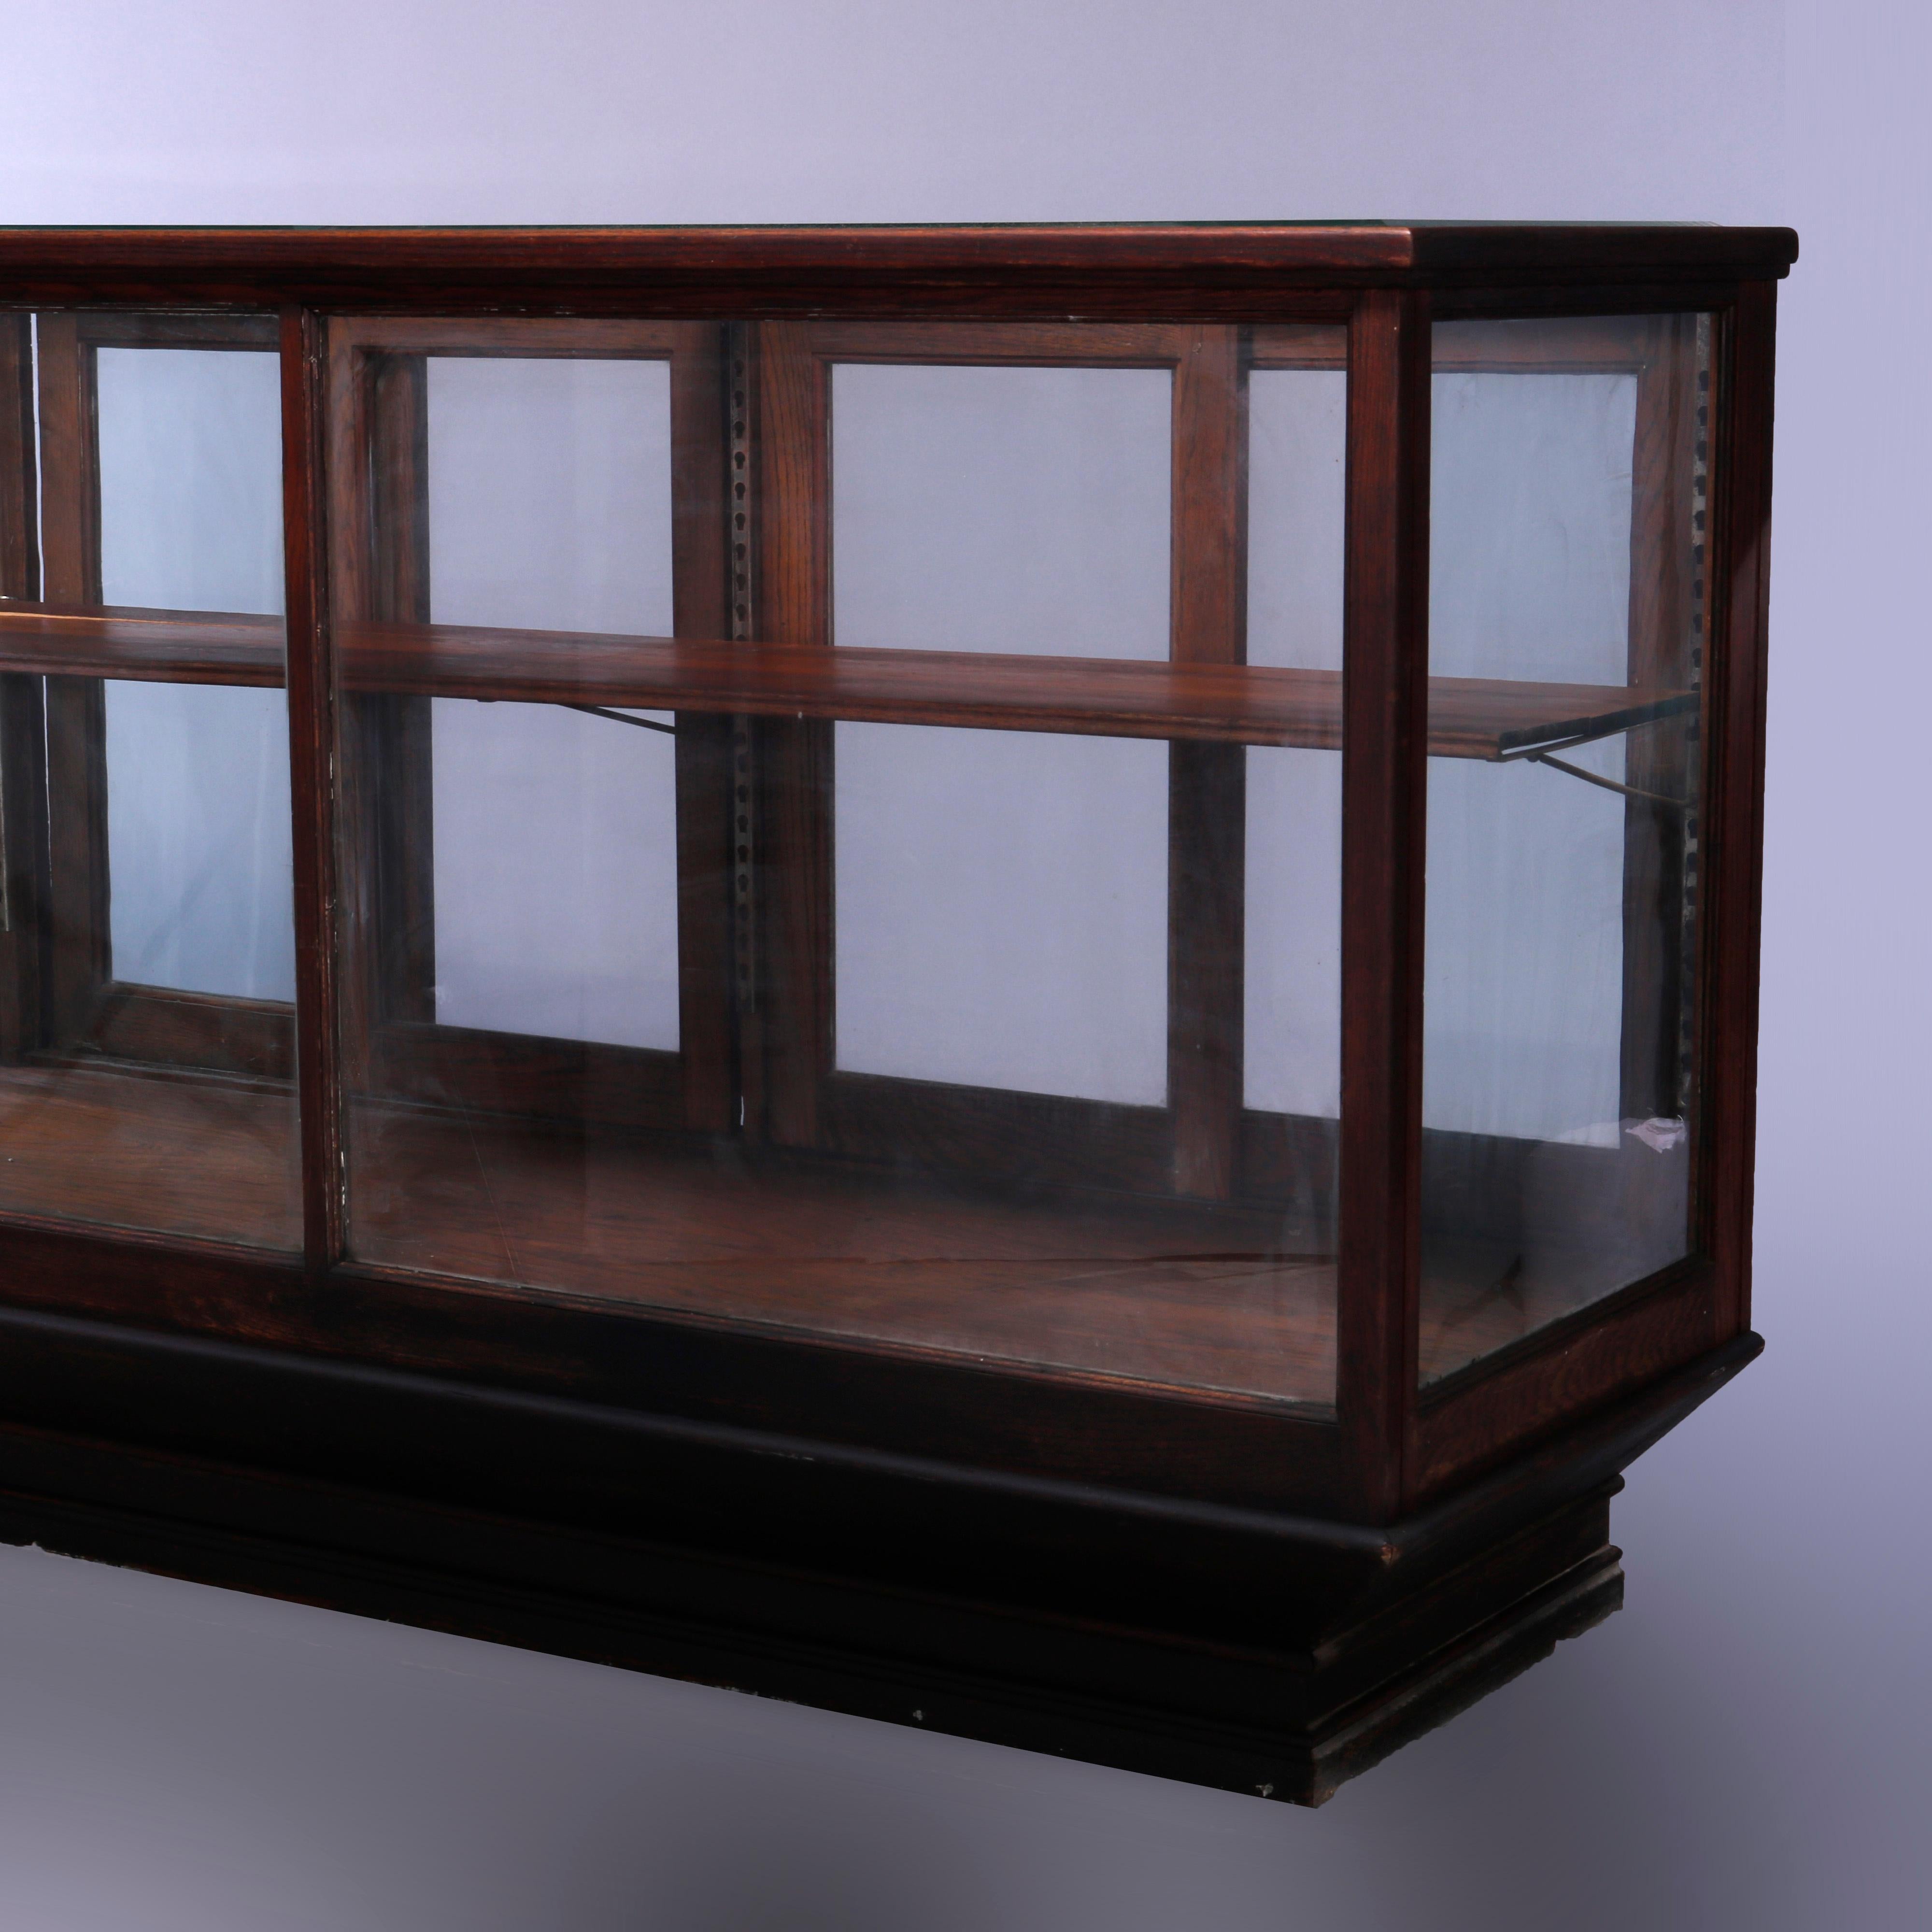 American Antique Oak & Glass Country Store Counter Display Case, circa 1900